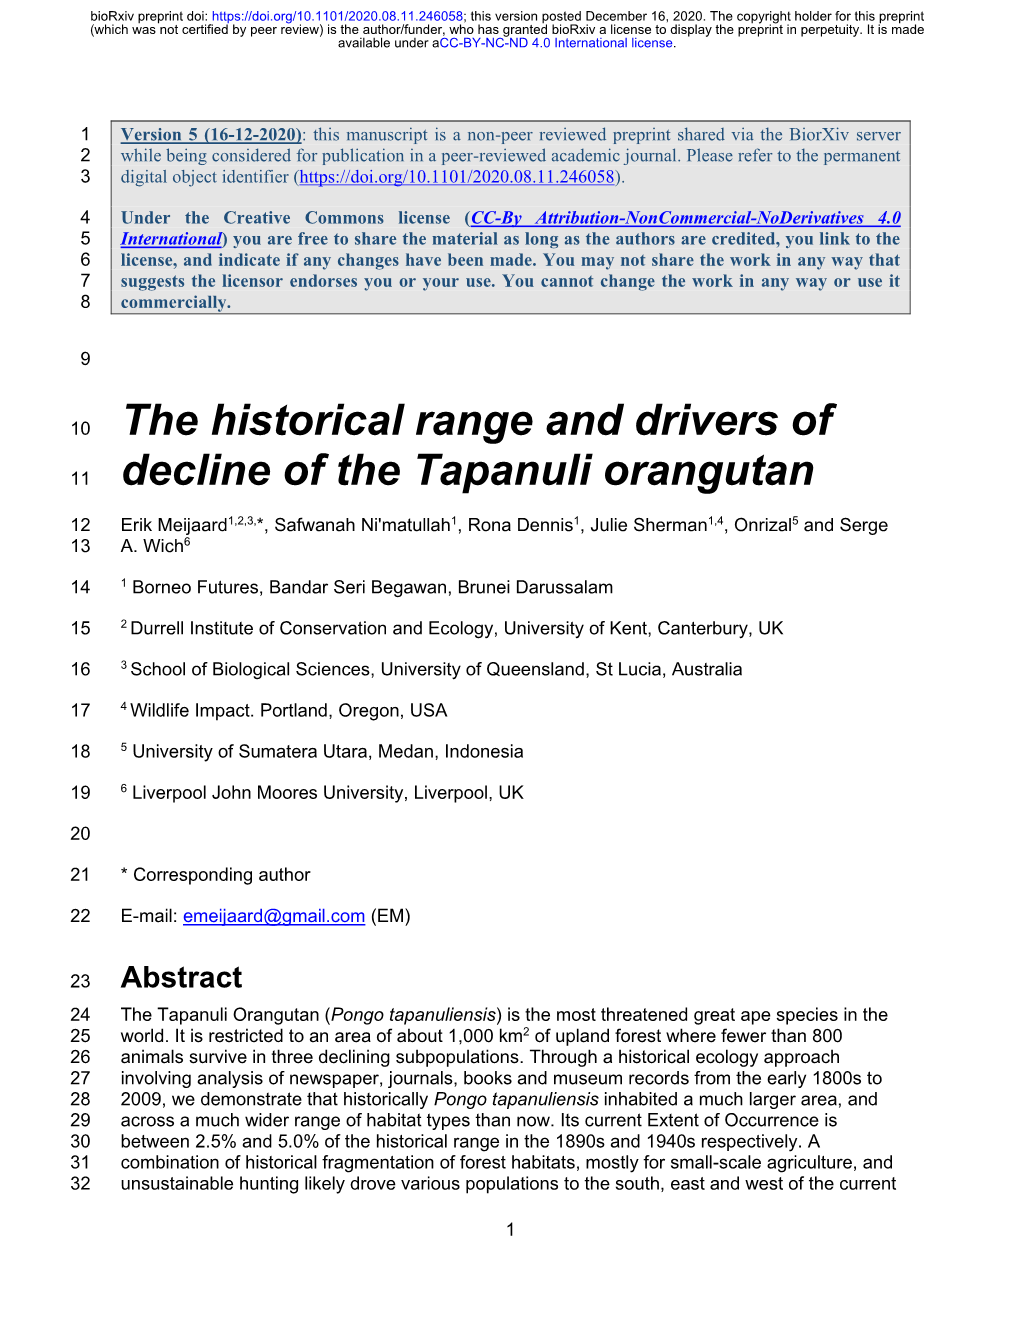 The Historical Range and Drivers of Decline of the Tapanuli